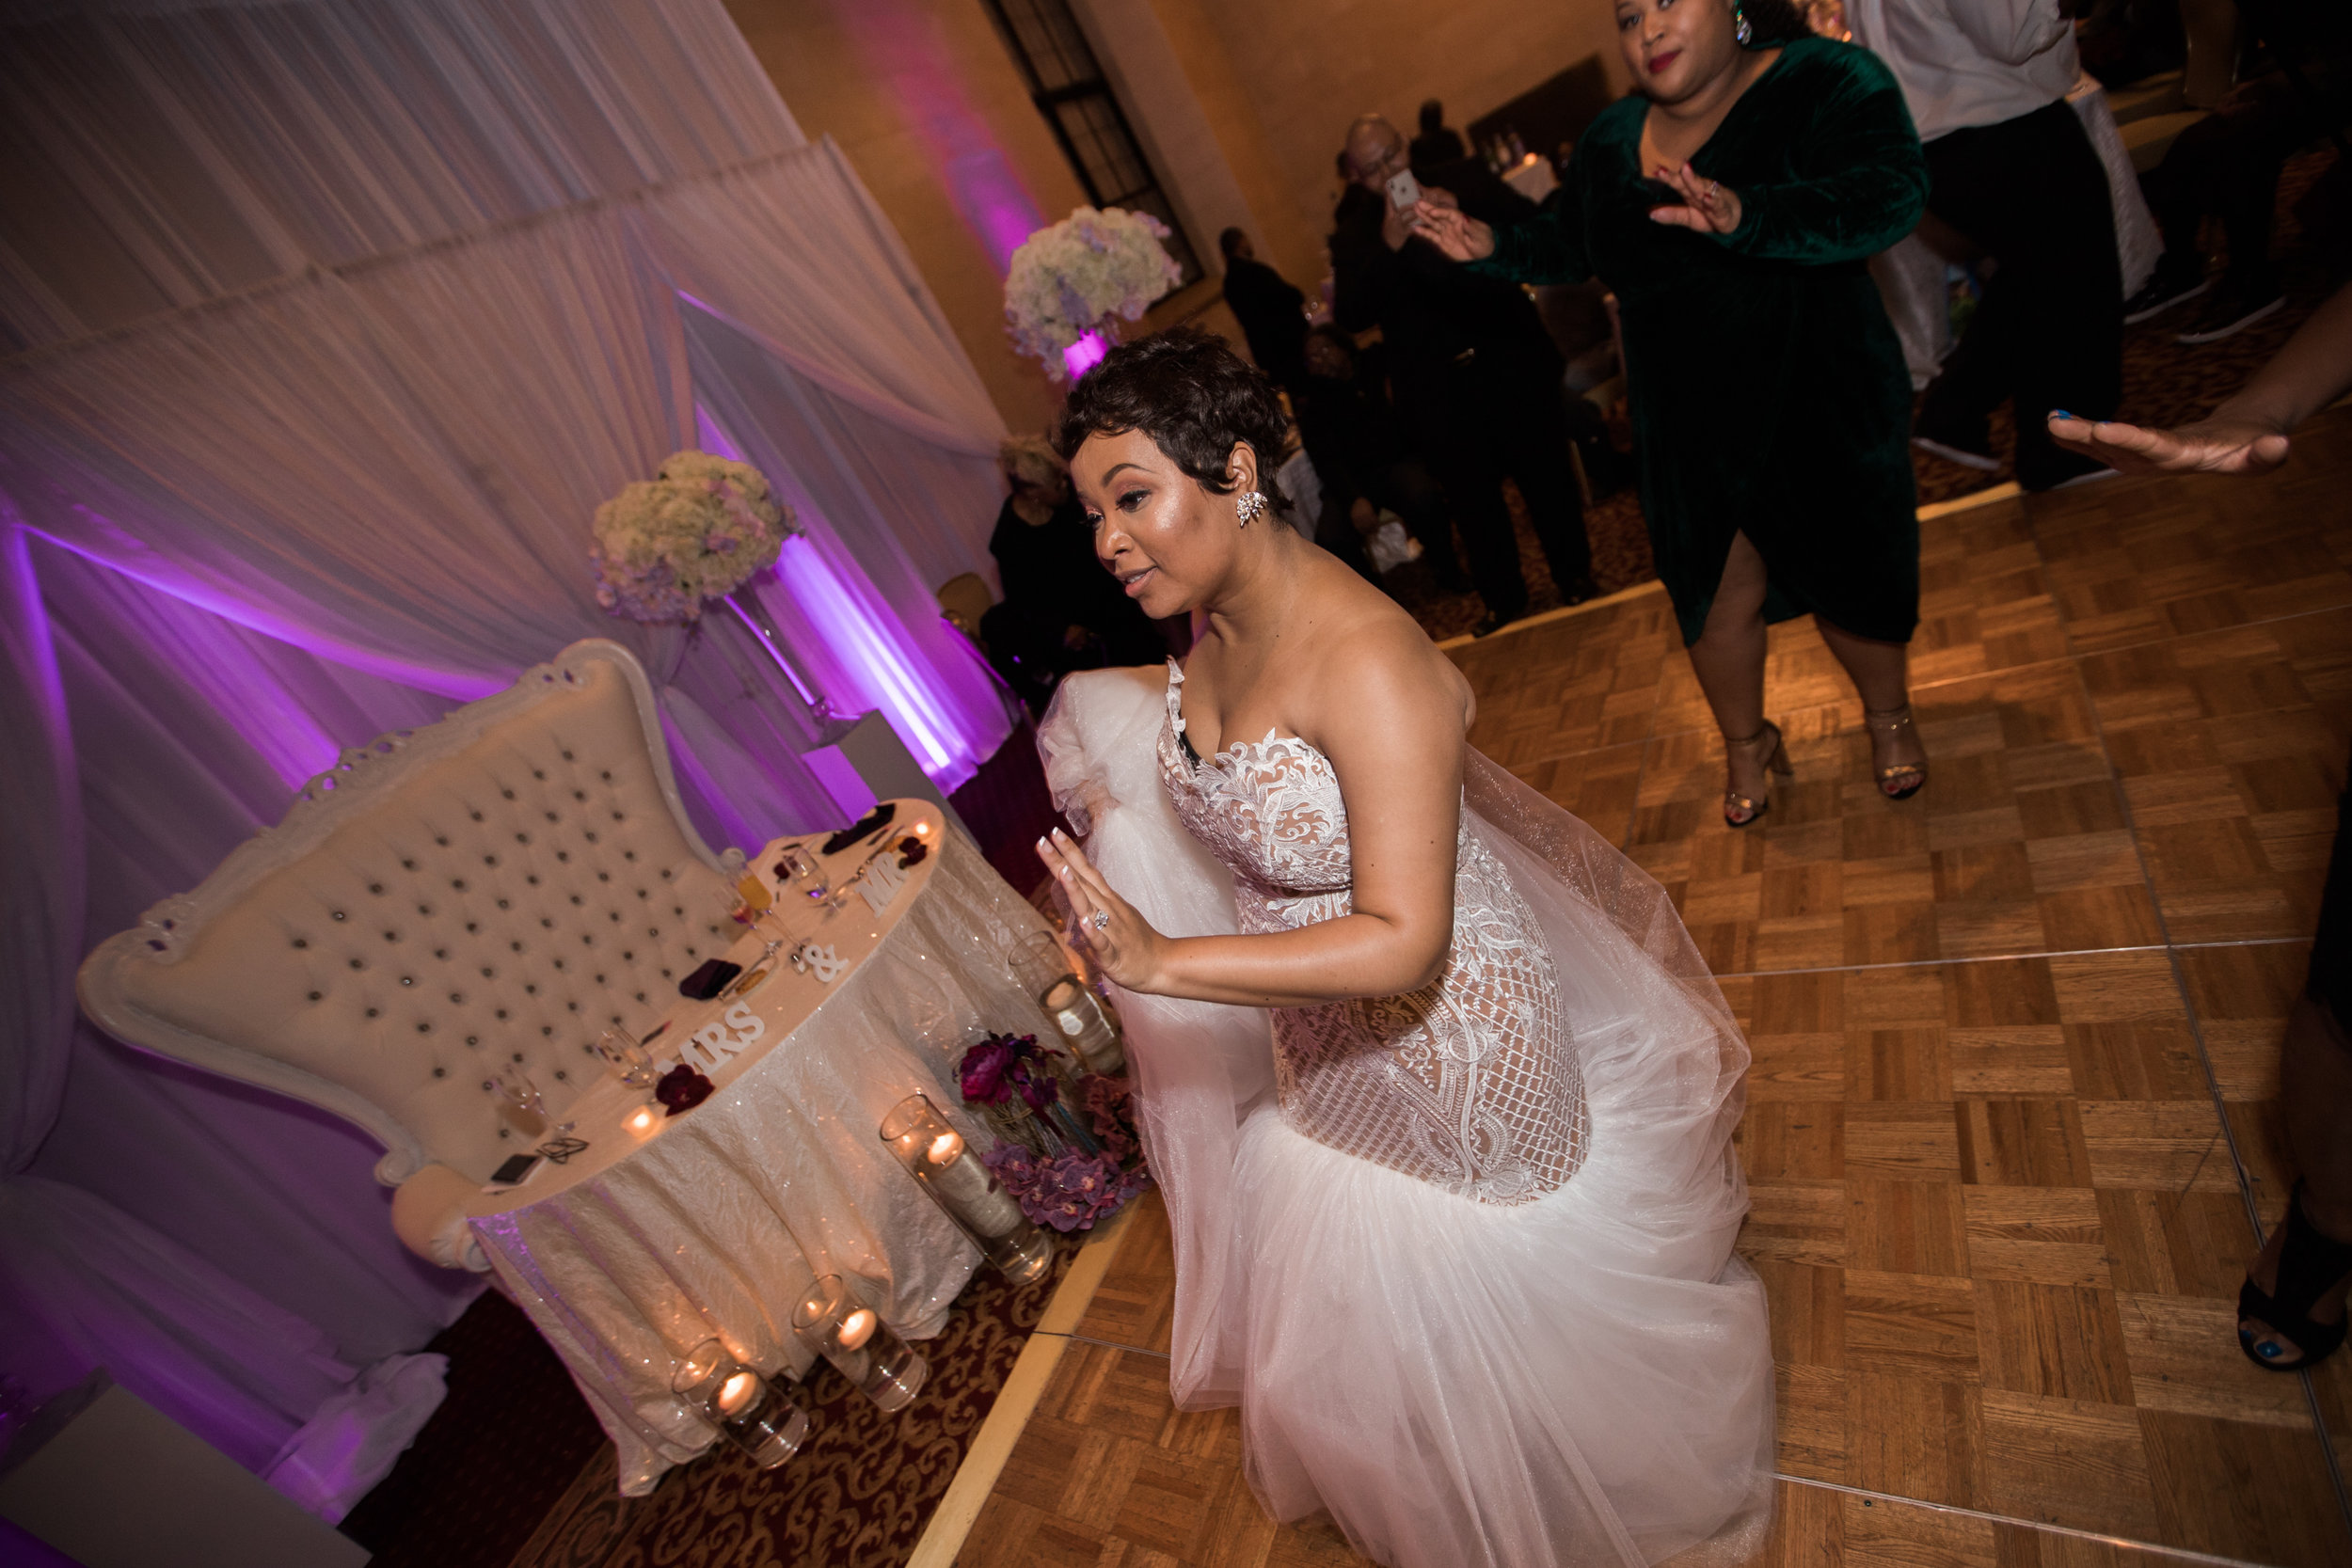 Best Classic Black Bride at The Grand Baltimore Maryland Husband and Wife Wedding Photographers Megapixels Media (89 of 98).jpg